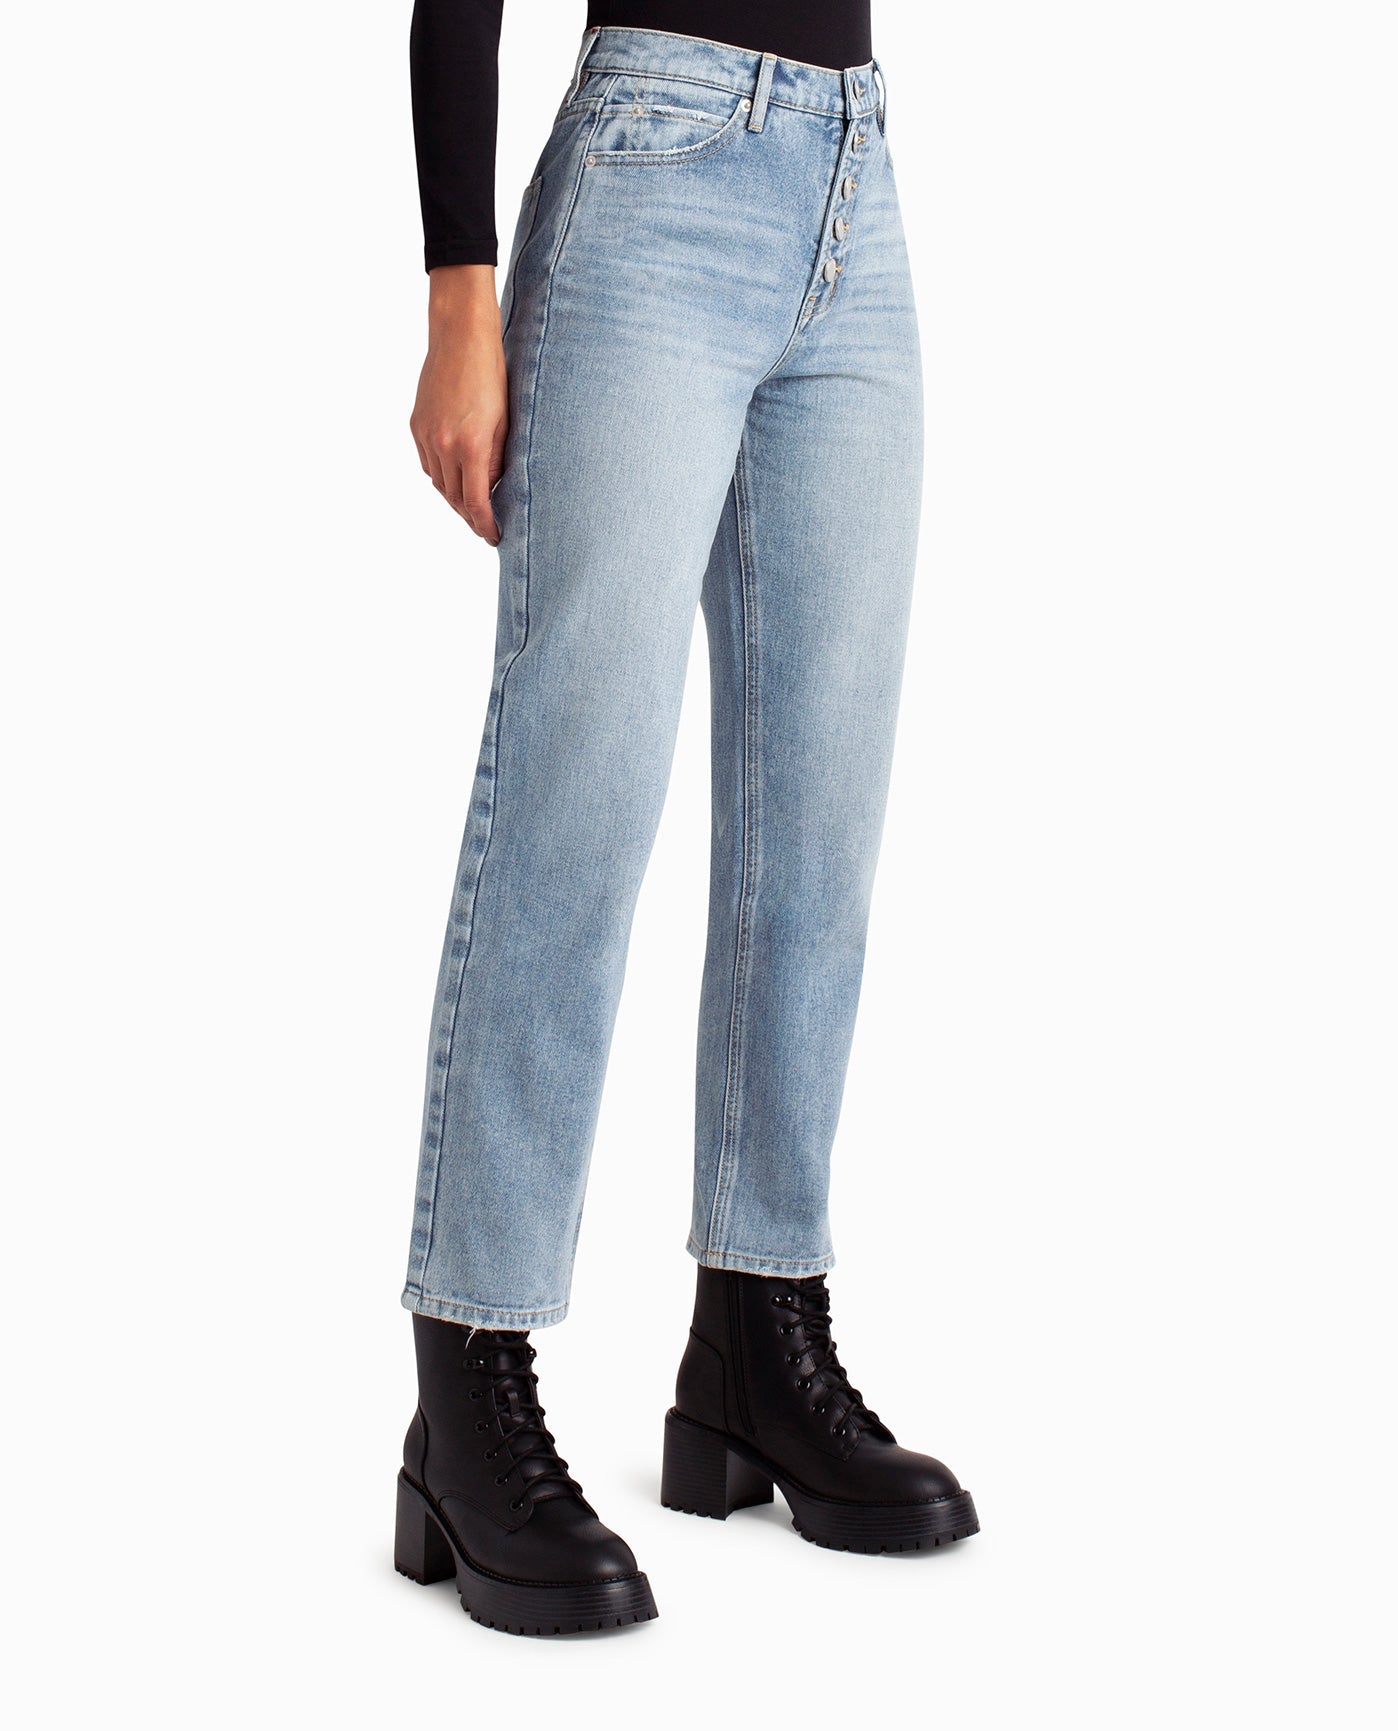 SIDE OF CLINTON HILL HIGH RISE 90'S LOOSE FIT JEAN | Medium Blue